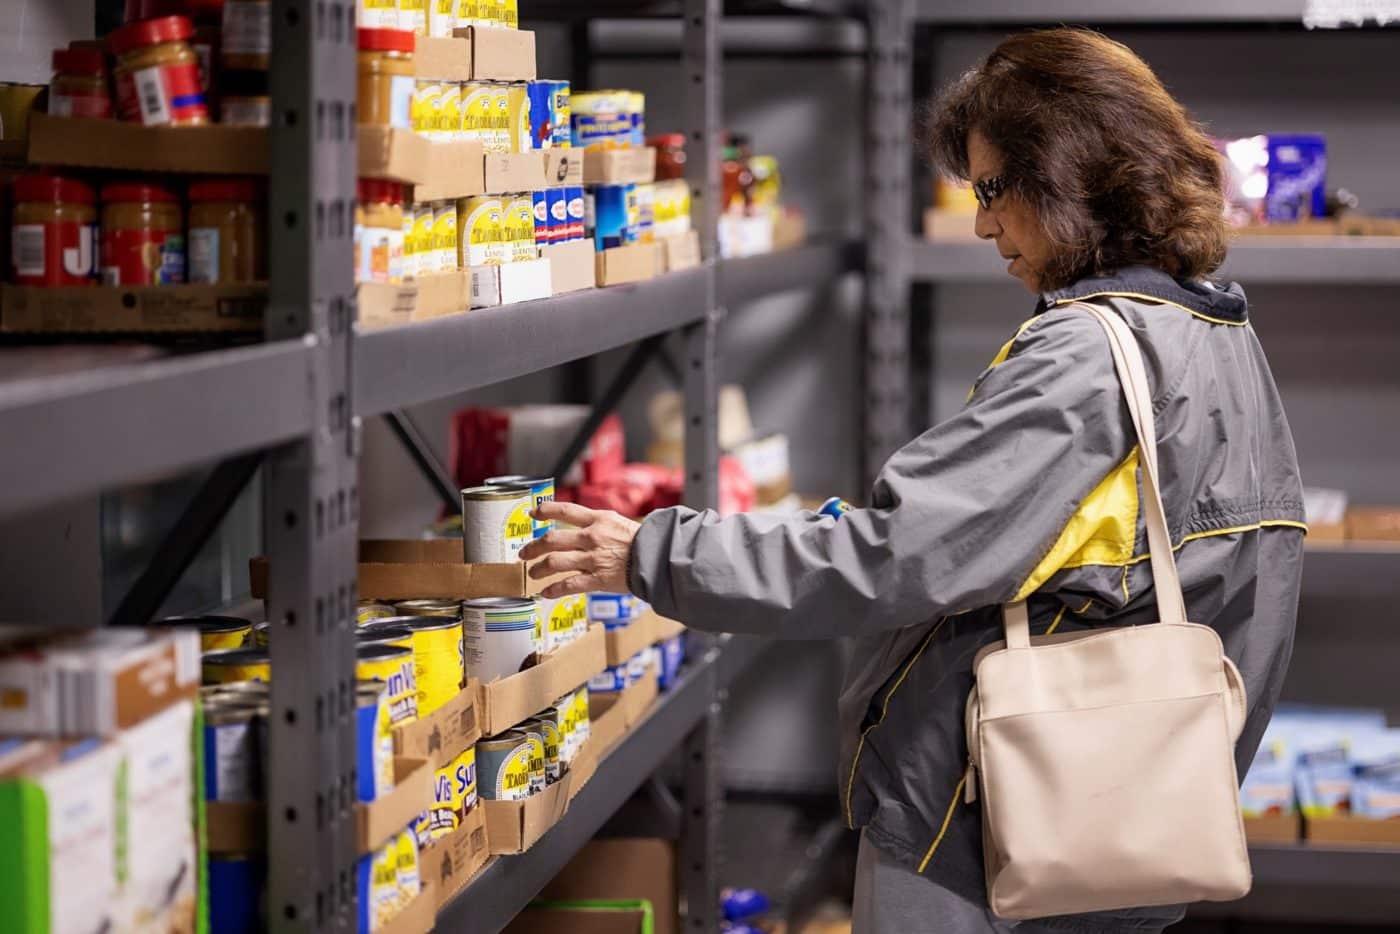 Woman with grey jacket and purse shopping for canned food